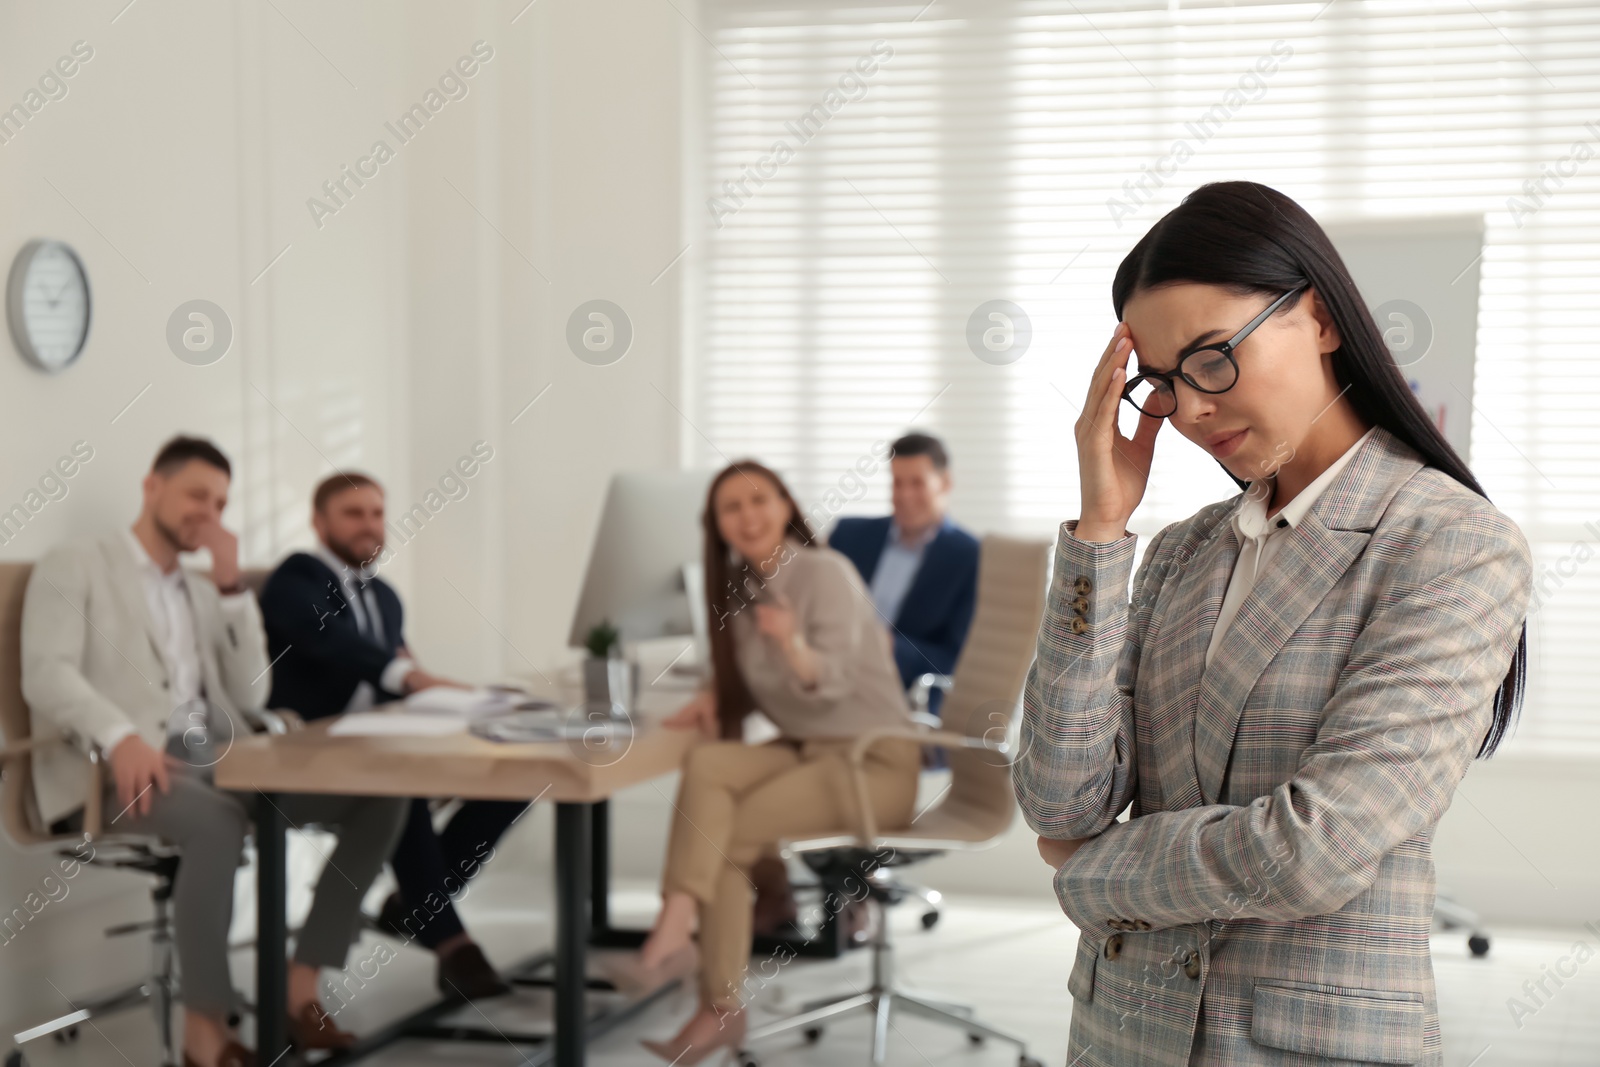 Photo of Woman suffering from toxic environment at work